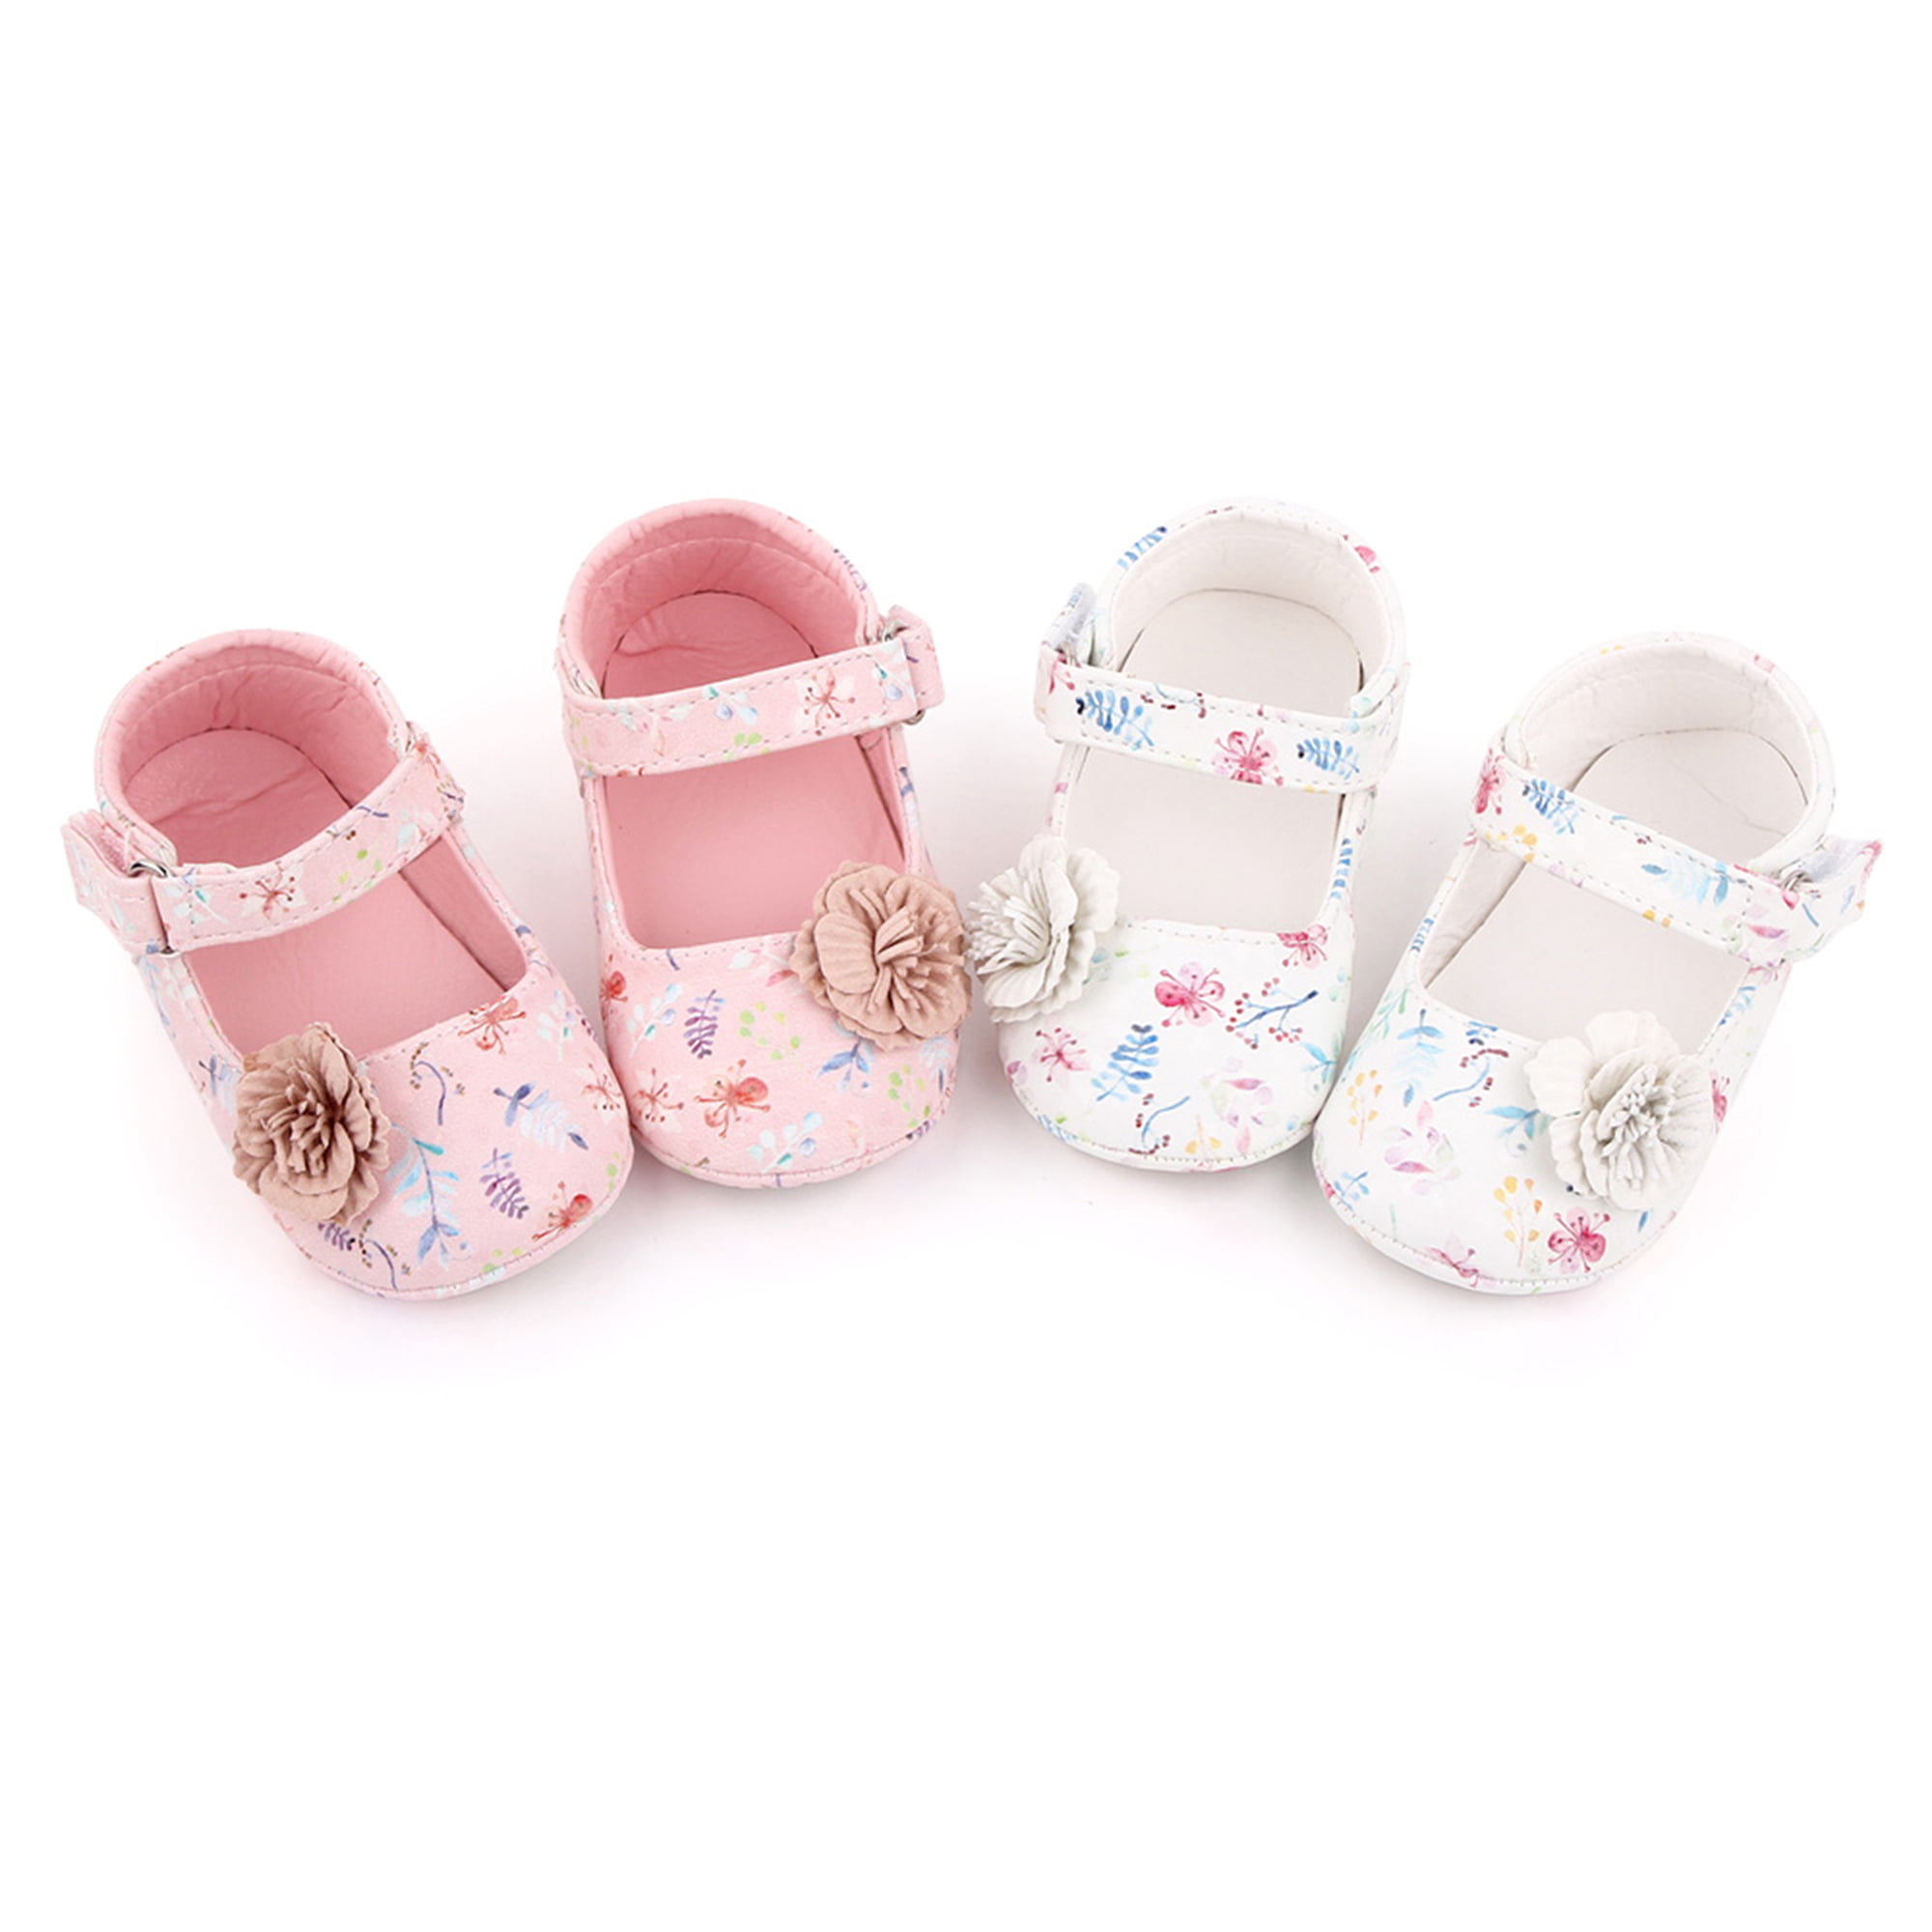 Baby Shoes Non-Slip Soft Sole Leather Flats First Walkers Newborn Babe Girls Floral Casual Princess Shoes